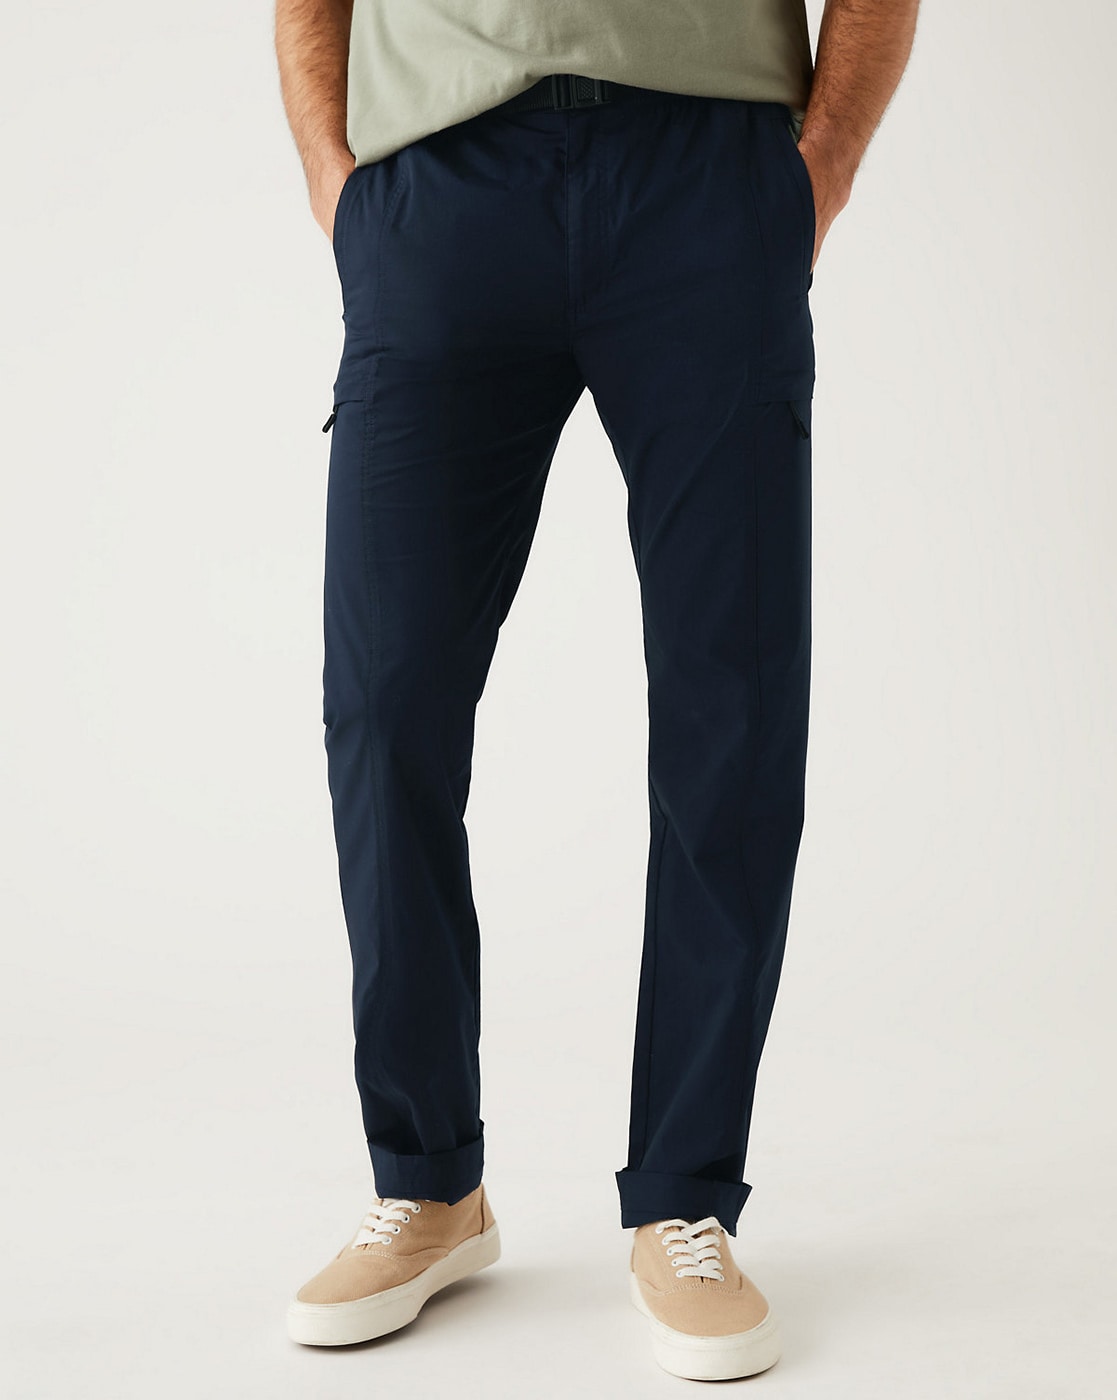 Buy Navy Blue Trousers & Pants for Men by Marks & Spencer Online